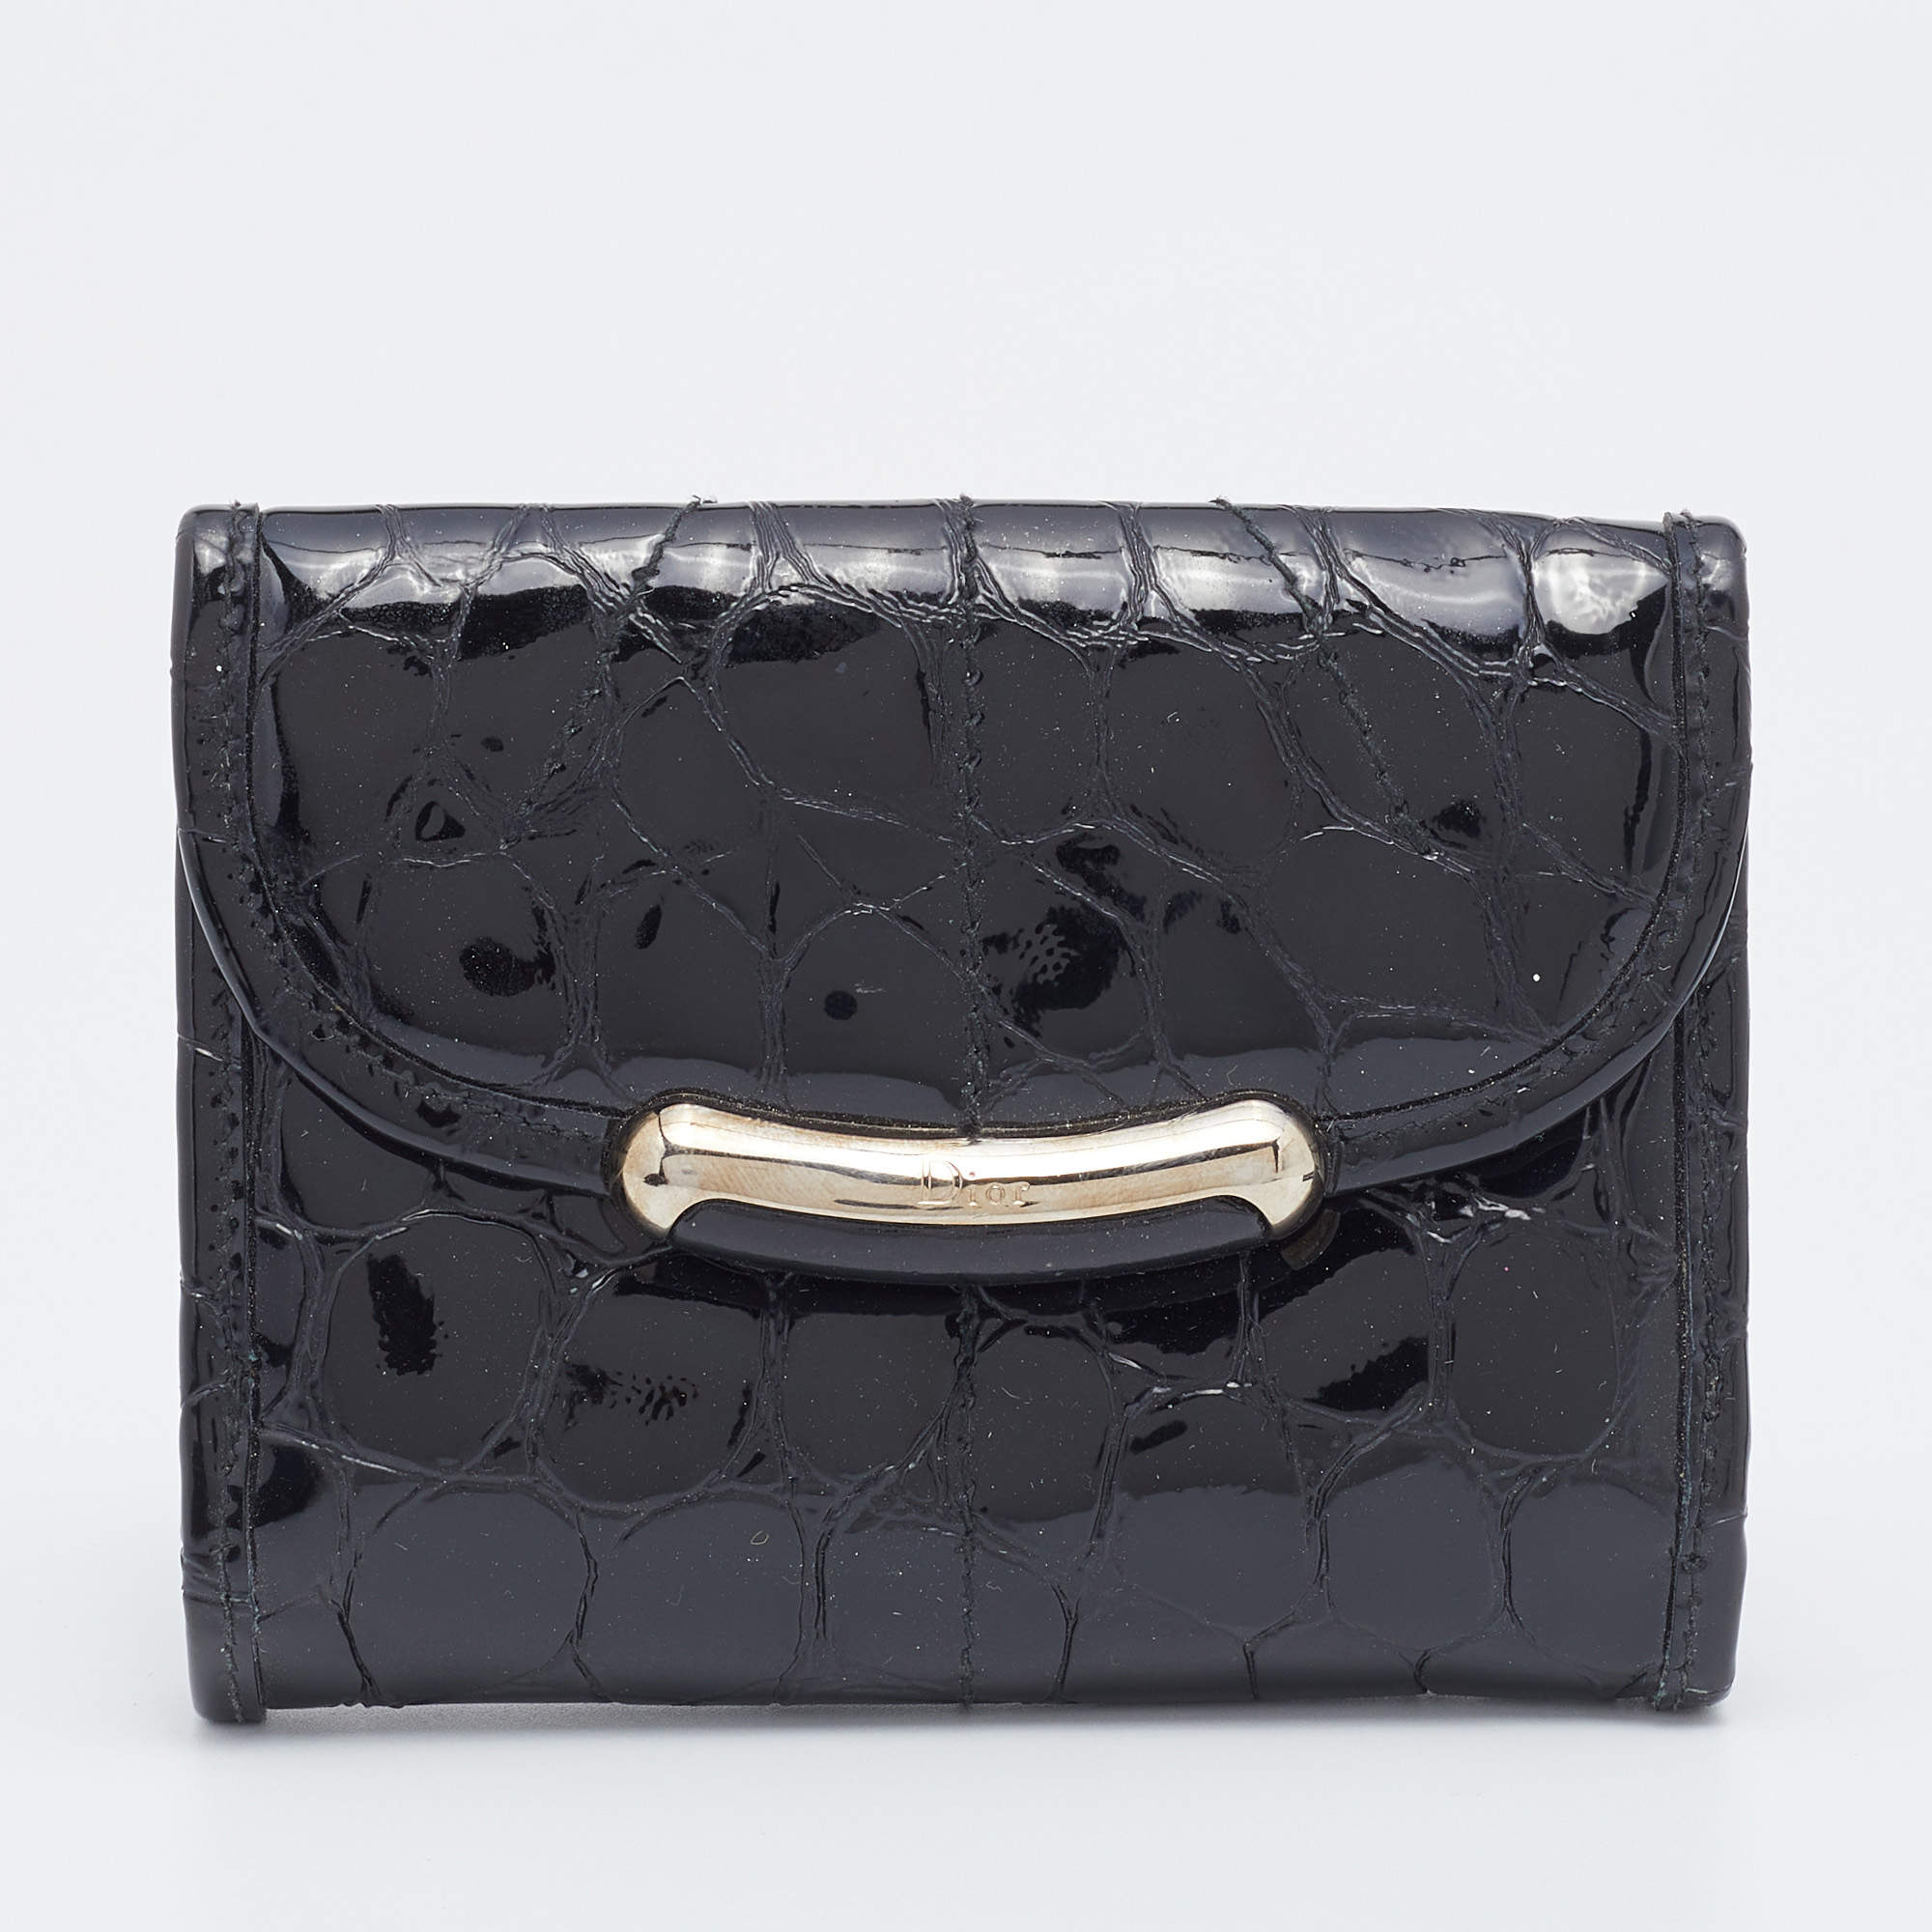 Dior Black Croc Embossed Patent Leather Compact Wallet